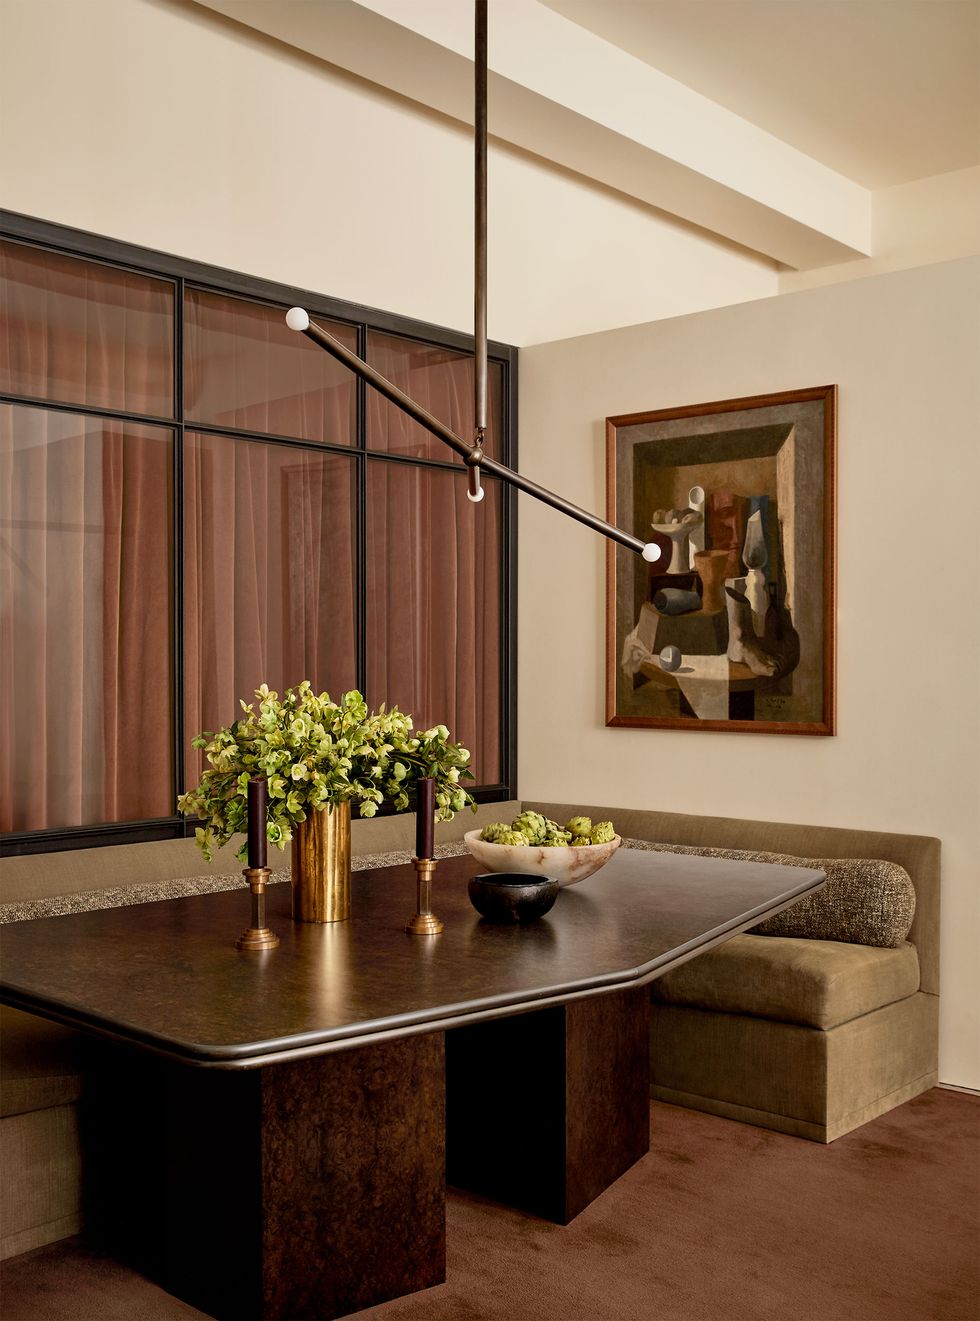 in a dining area is a five sided dark burl wood table against a frosted glass wall, a light brown cushioned banquette with an abstract artwork above one end, a three armed pendant, and a vase of green flowers